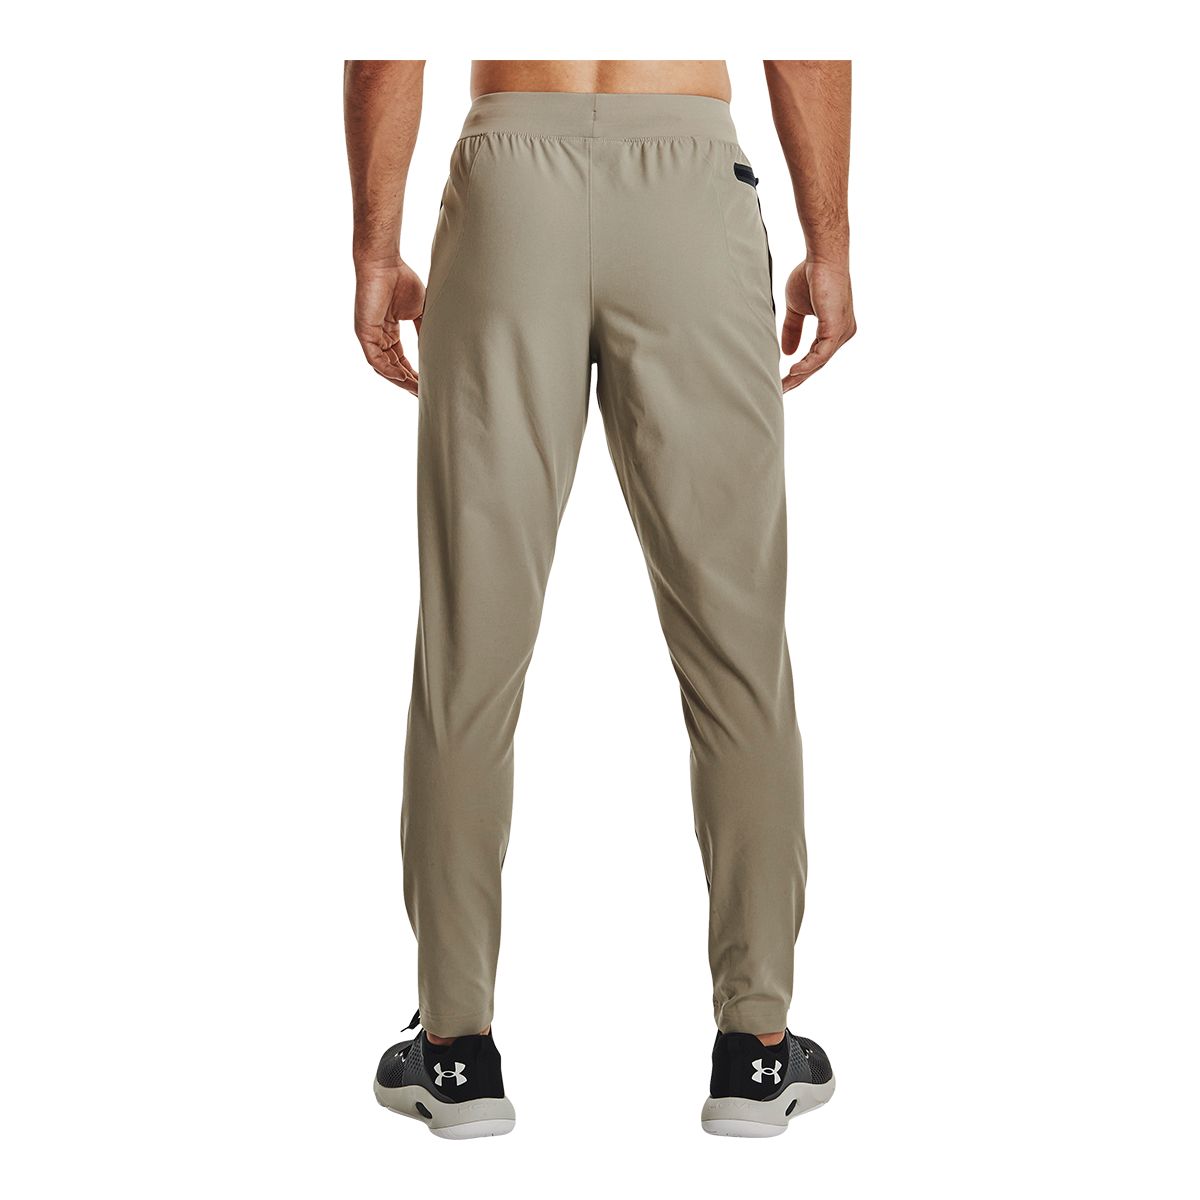 Under Armour Men's Stretch Woven Utility Pants, Water-Repellant ...